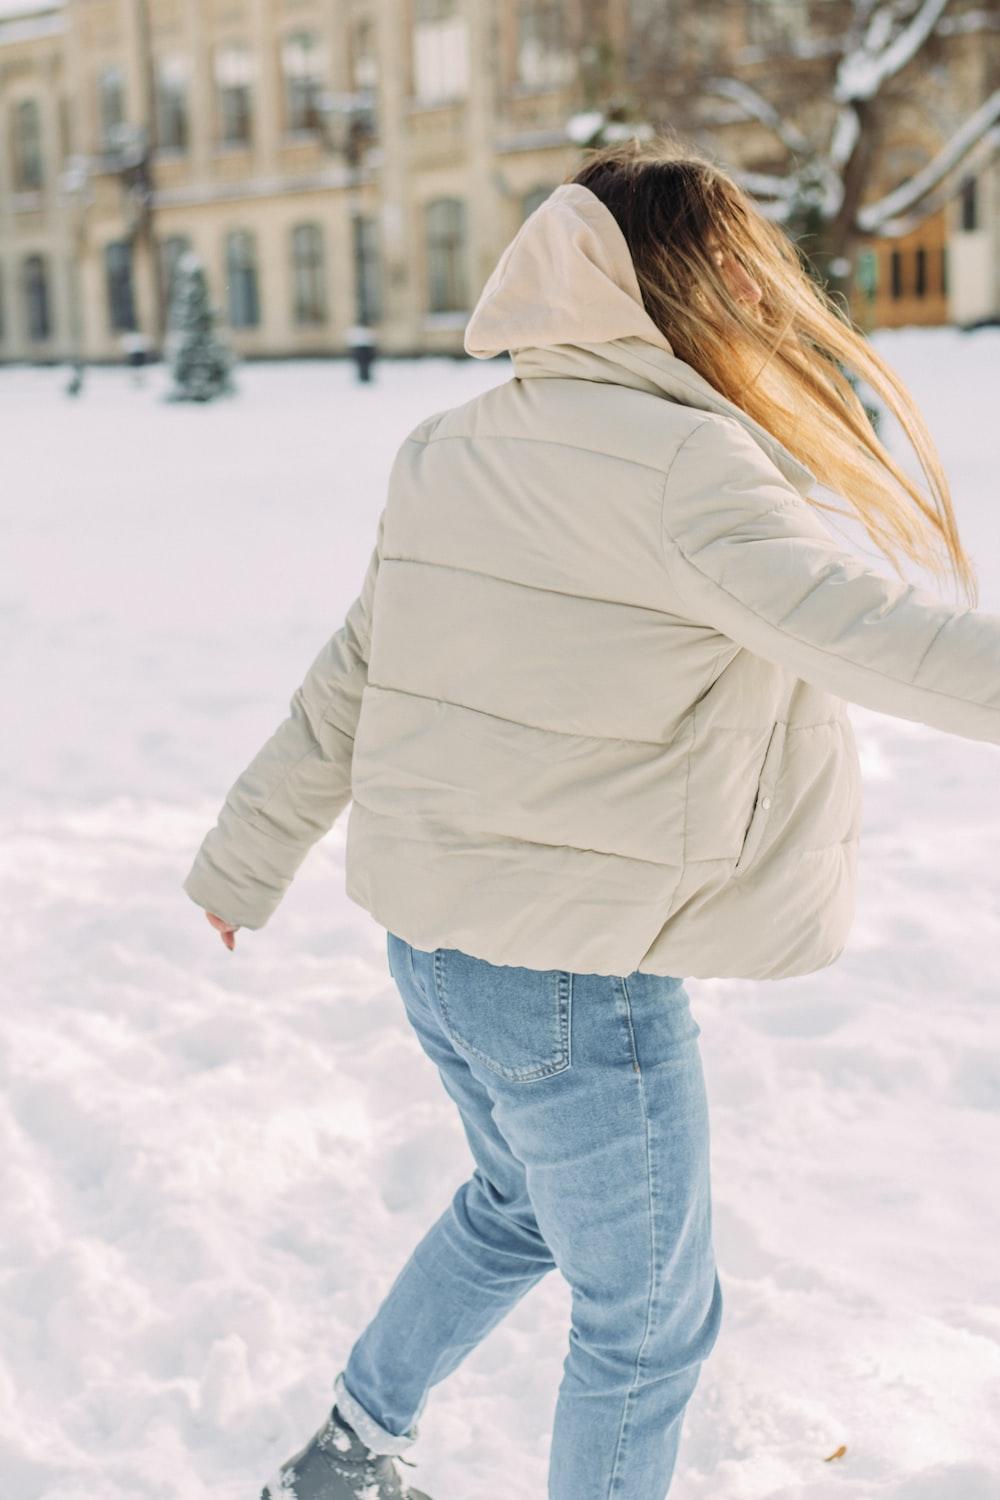 7 Winter Outfit Ideas for Winter Pants for Women - The Kosha Journal